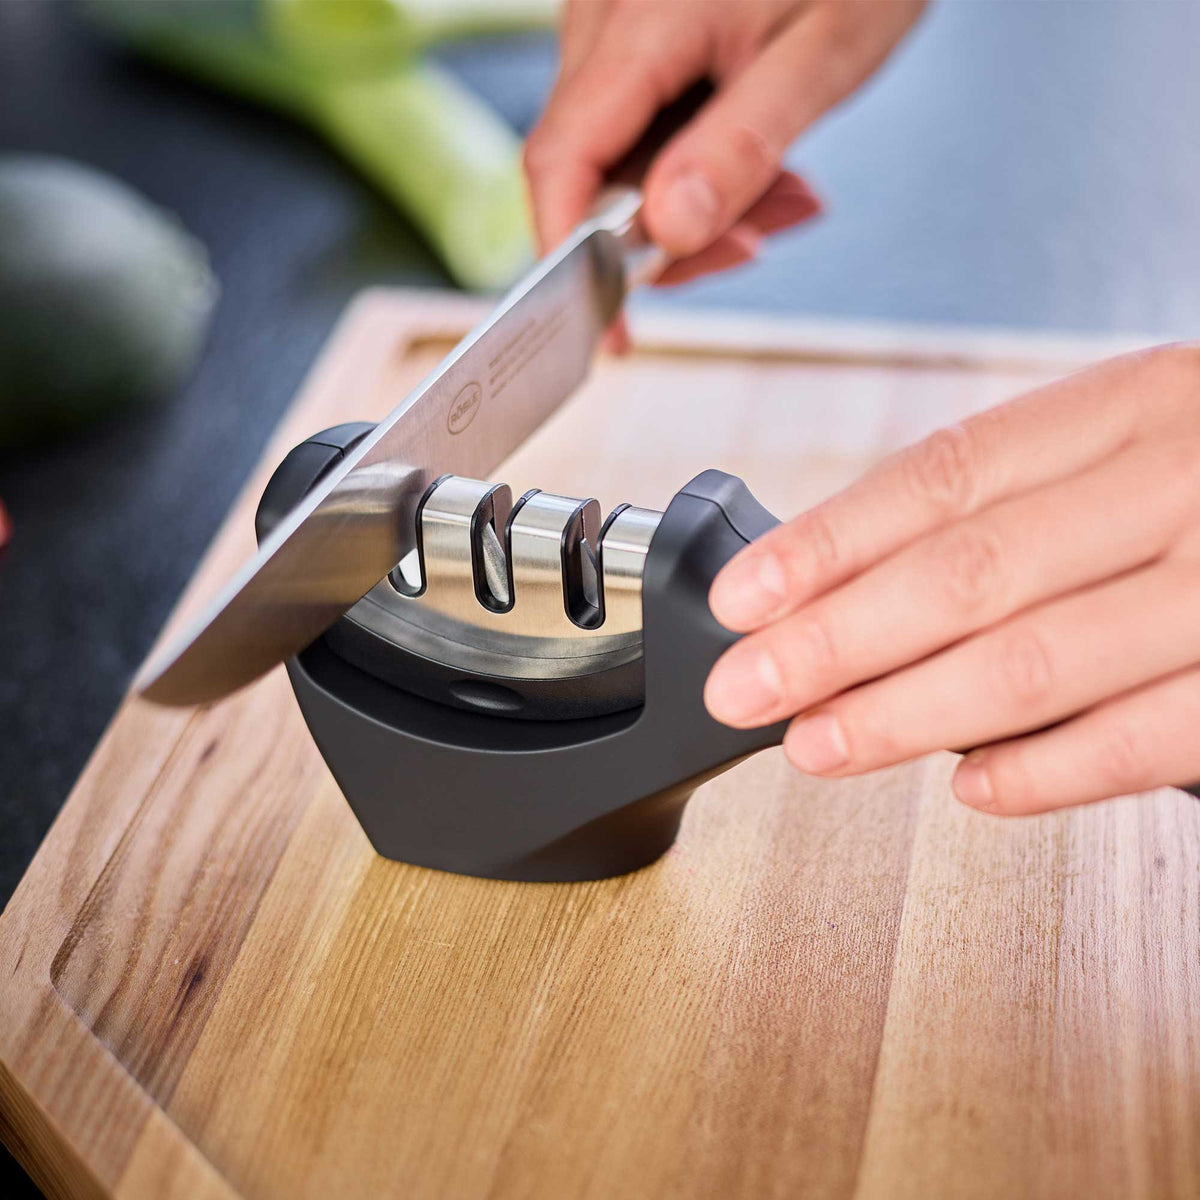 AnySharp Essentials - Knife Sharpener with PowerGrip - For Knives and  Serrated Blades